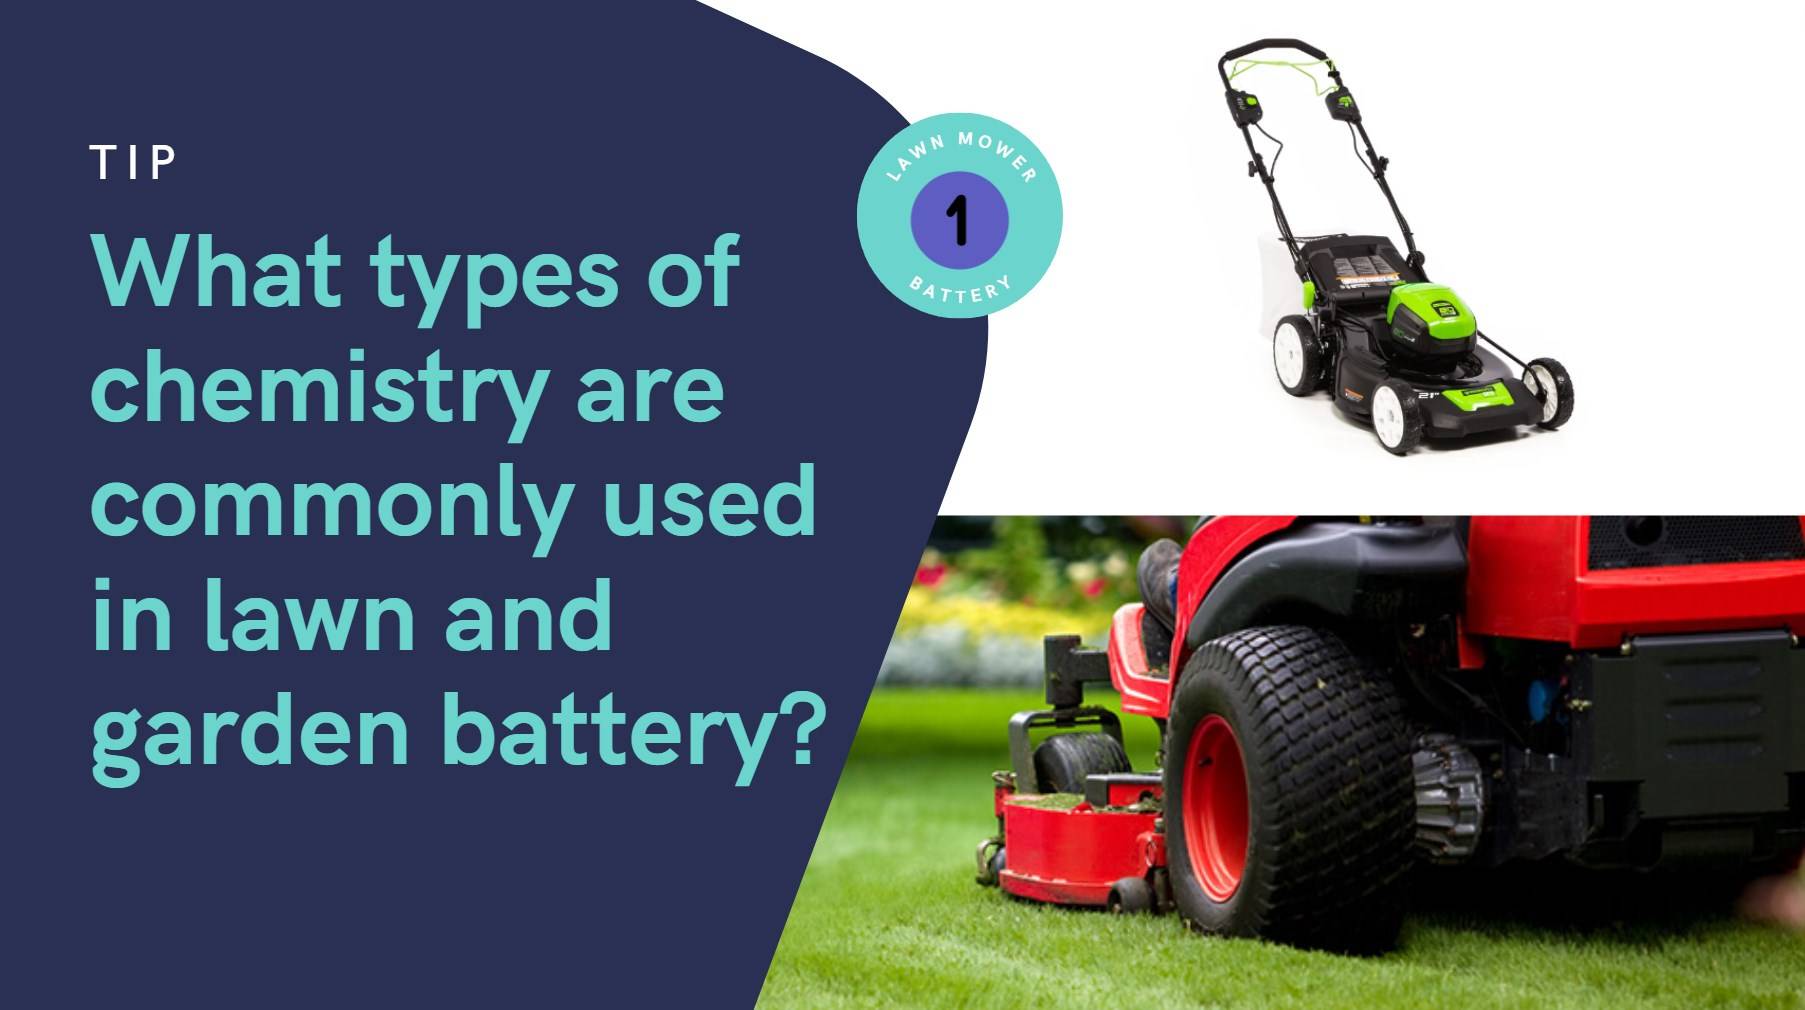 What types of chemistry are commonly used in lawn and garden batteries?